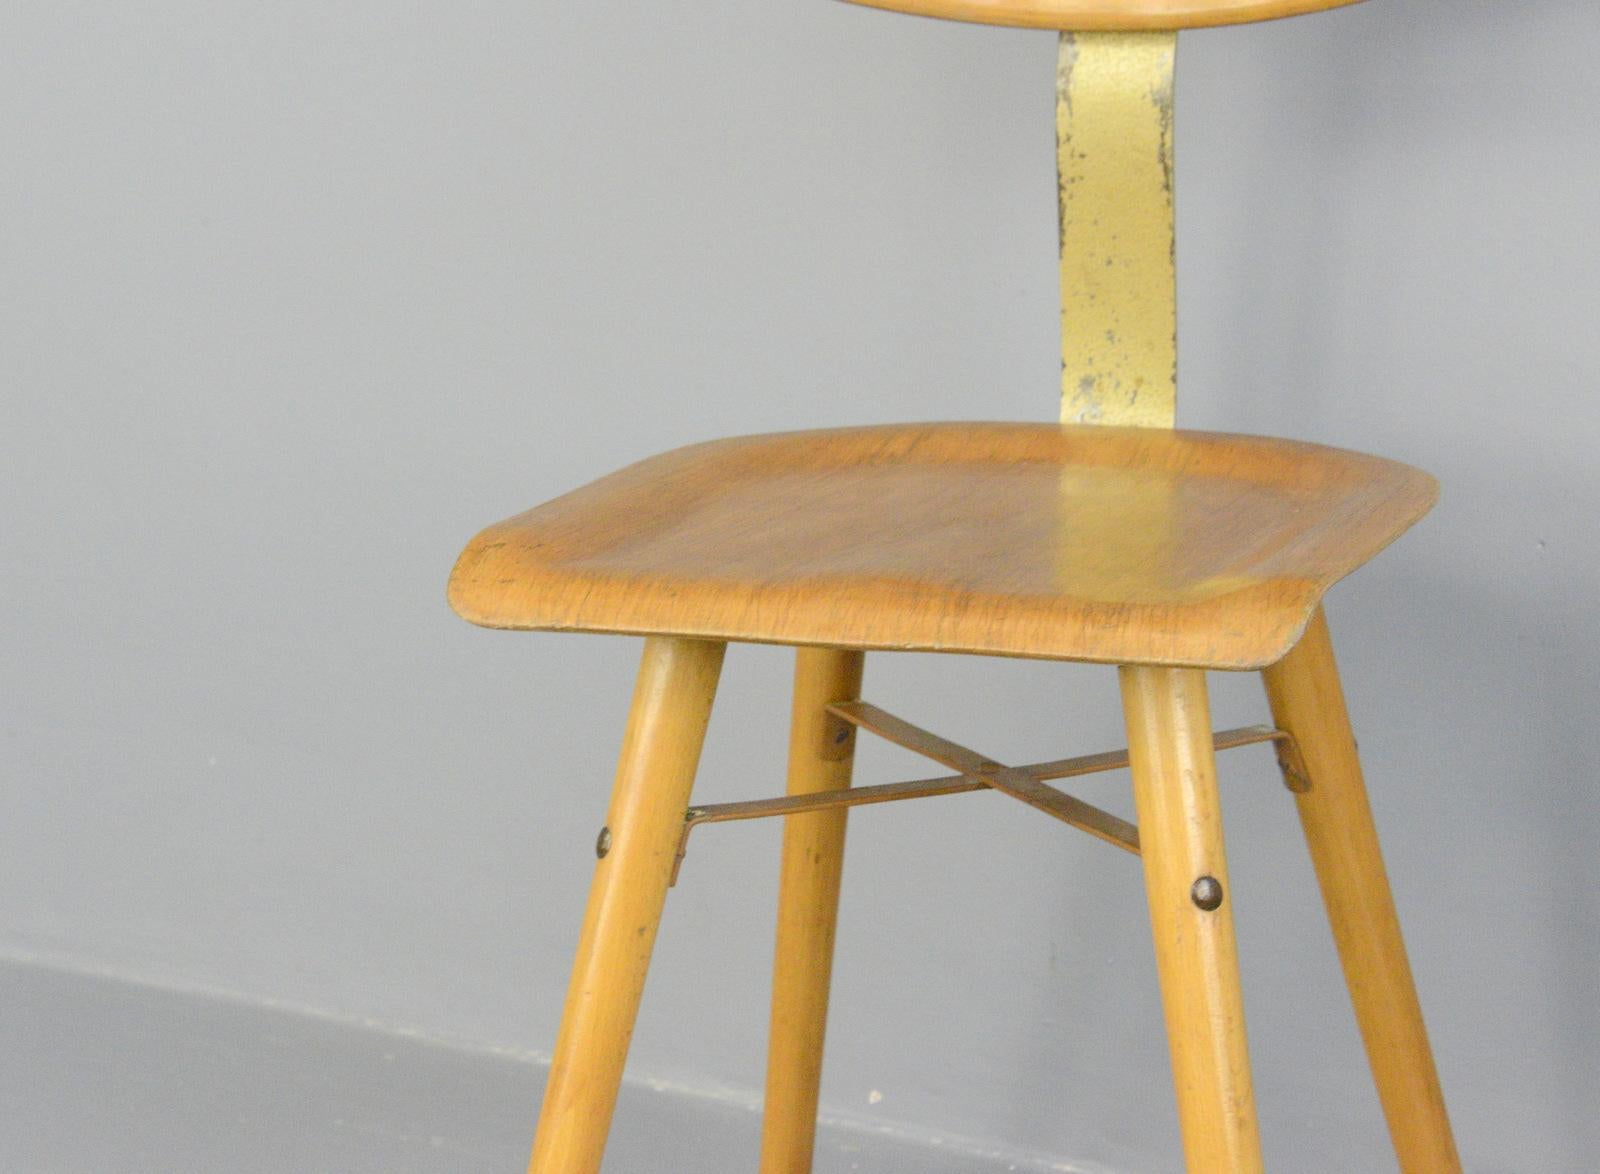 Industrial work stool by Ama, circa 1930s

- Ply seat
- Sprung steel back rest
- Designed by Albert Menger
- Produced by Ama, Nordhalben
- German, 1930s
- Measures: 39cm wide x 47cm deep x 90cm tall
- 52cm seat height

Condition